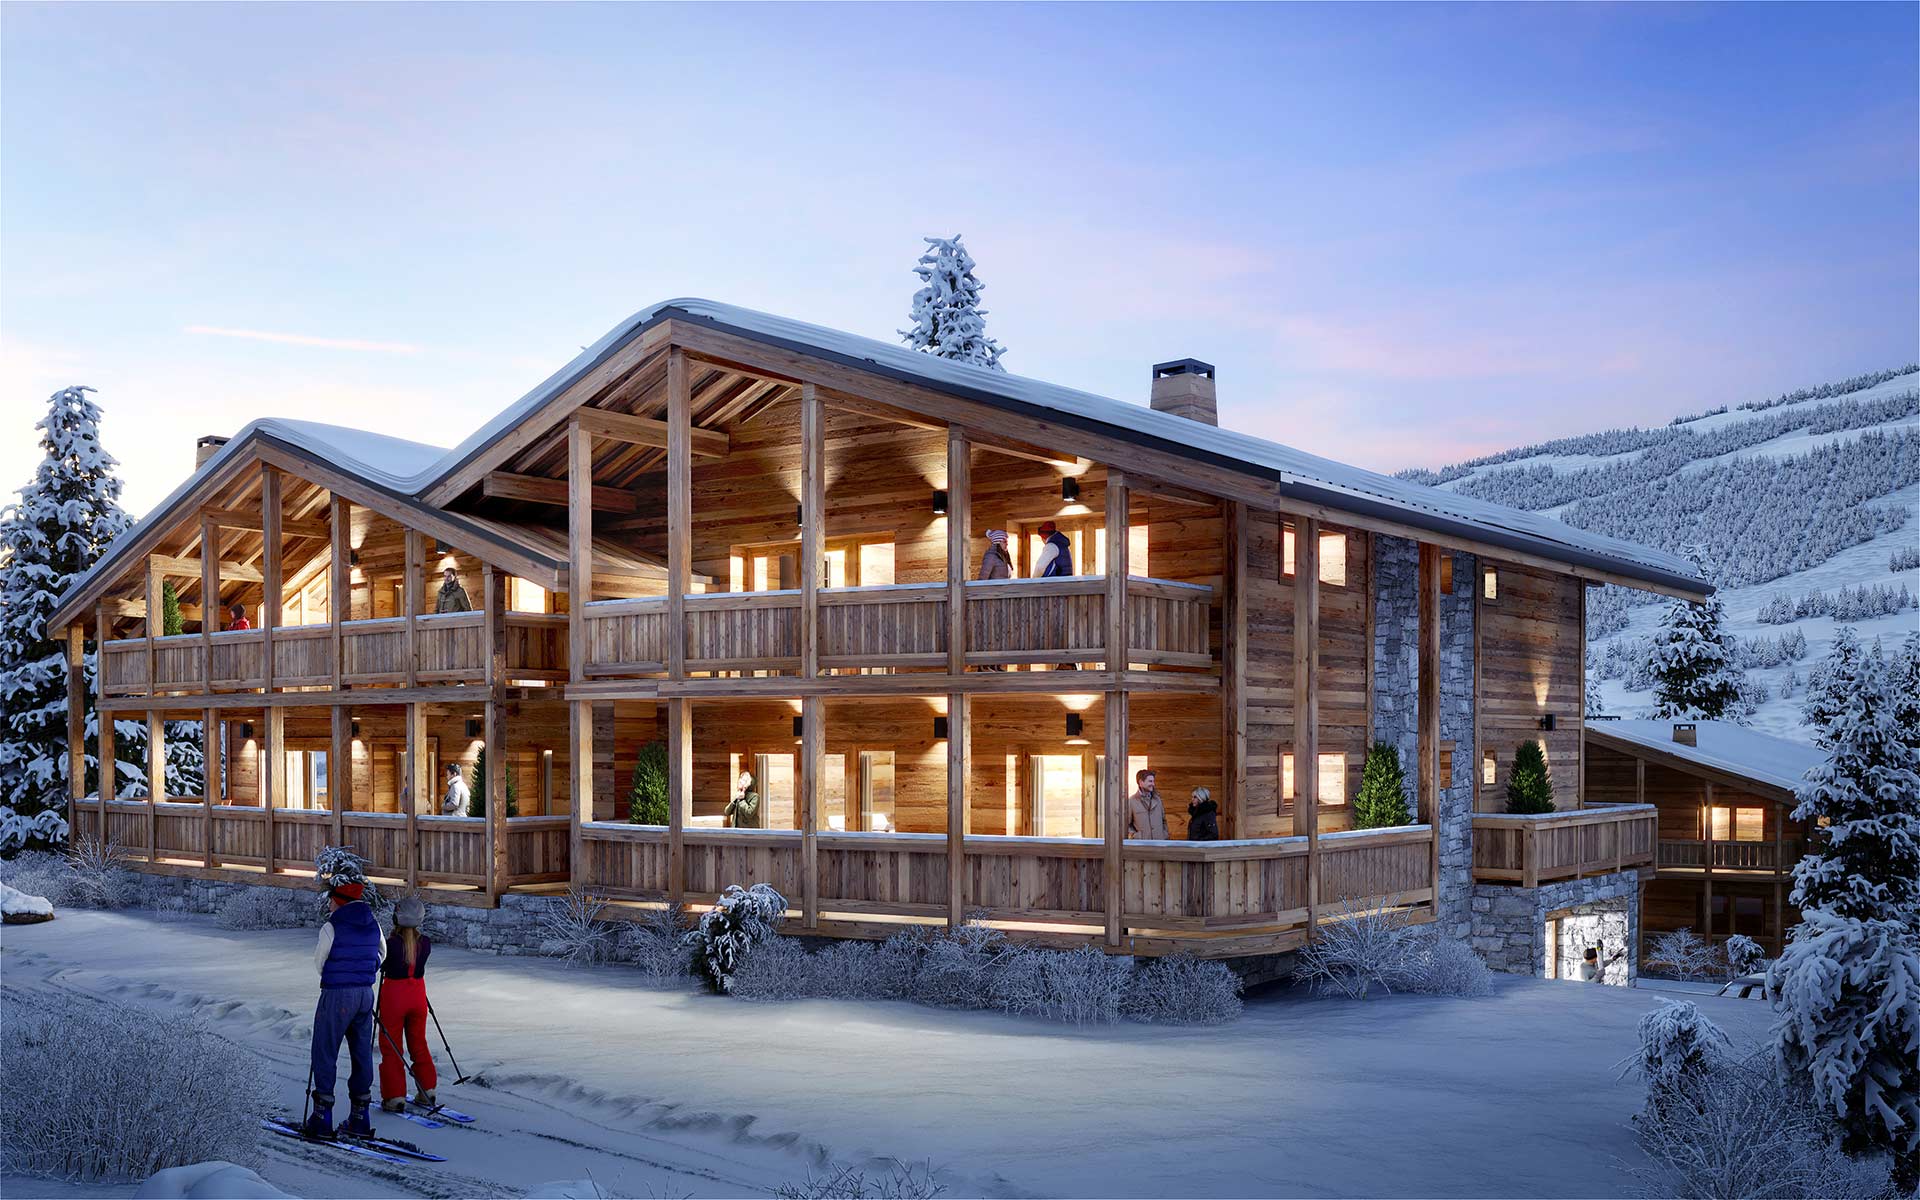 3D exterior visualization of a cosy family chalet in a snowy environment